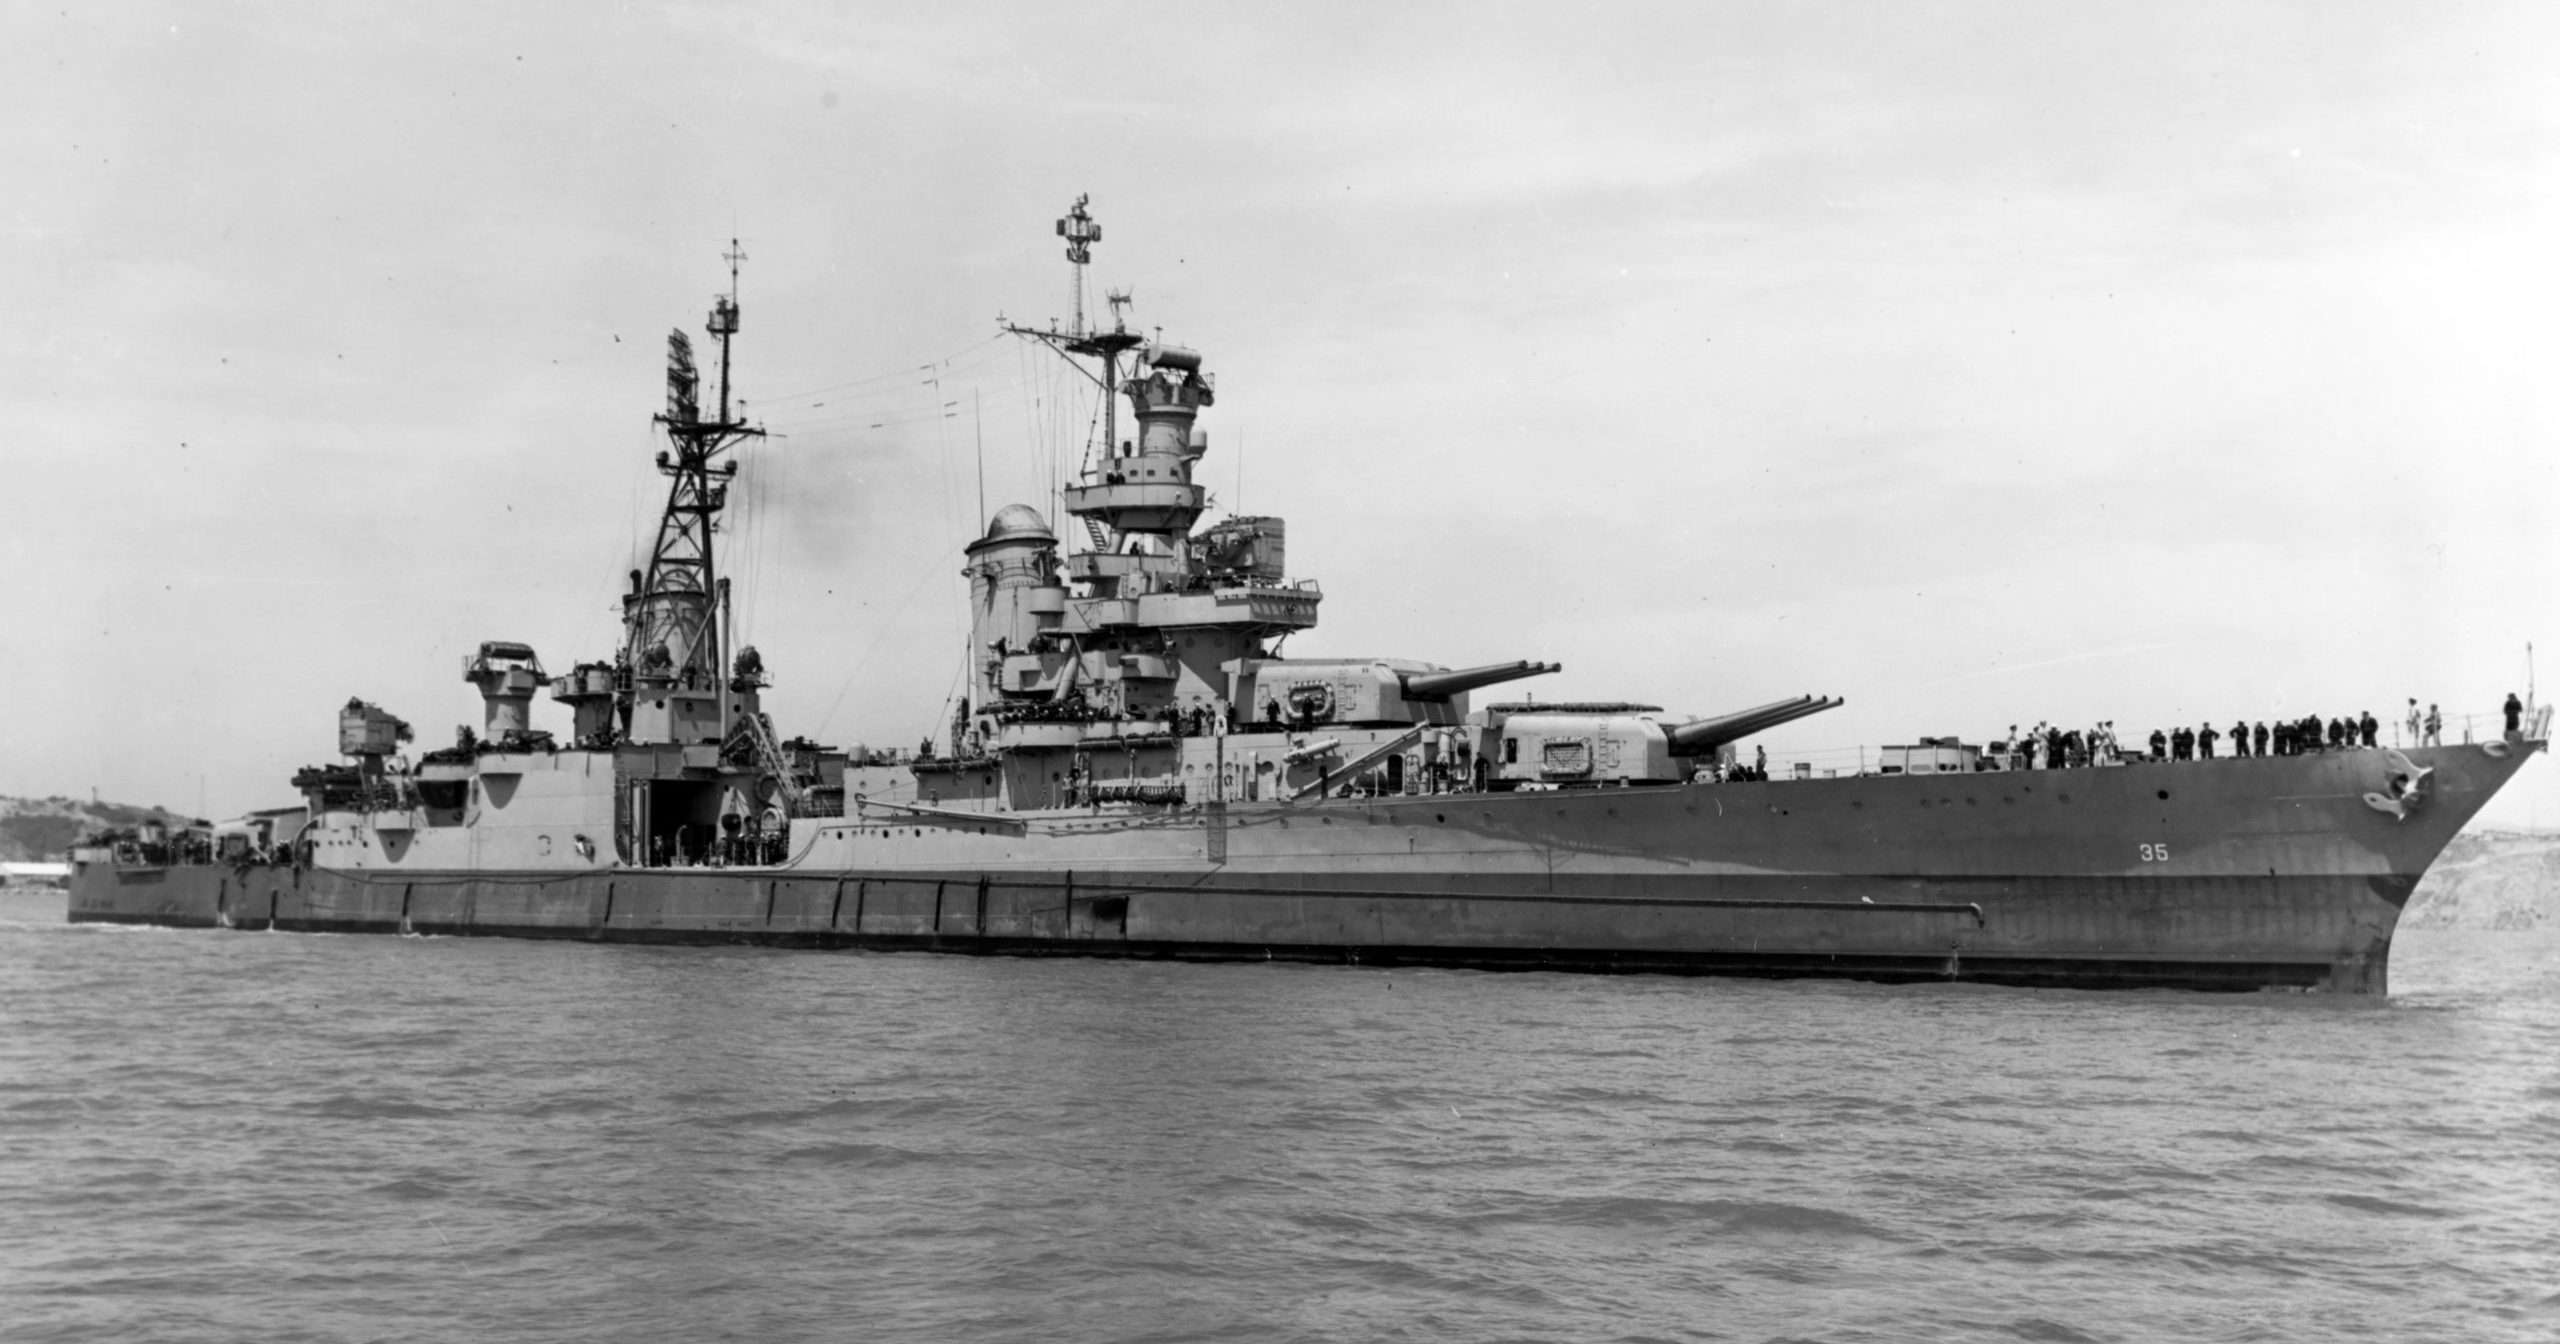 In this July 10, 1945, photo provided by U.S. Navy, the USS Indianapolis is seen off the Mare Island Navy Yard in Northern California. Congress has awarded the Congressional Gold Medal, its highest honor, to crew members of the ship that delivered key components of the first nuclear bomb and was later sunk by Japan during World War II.